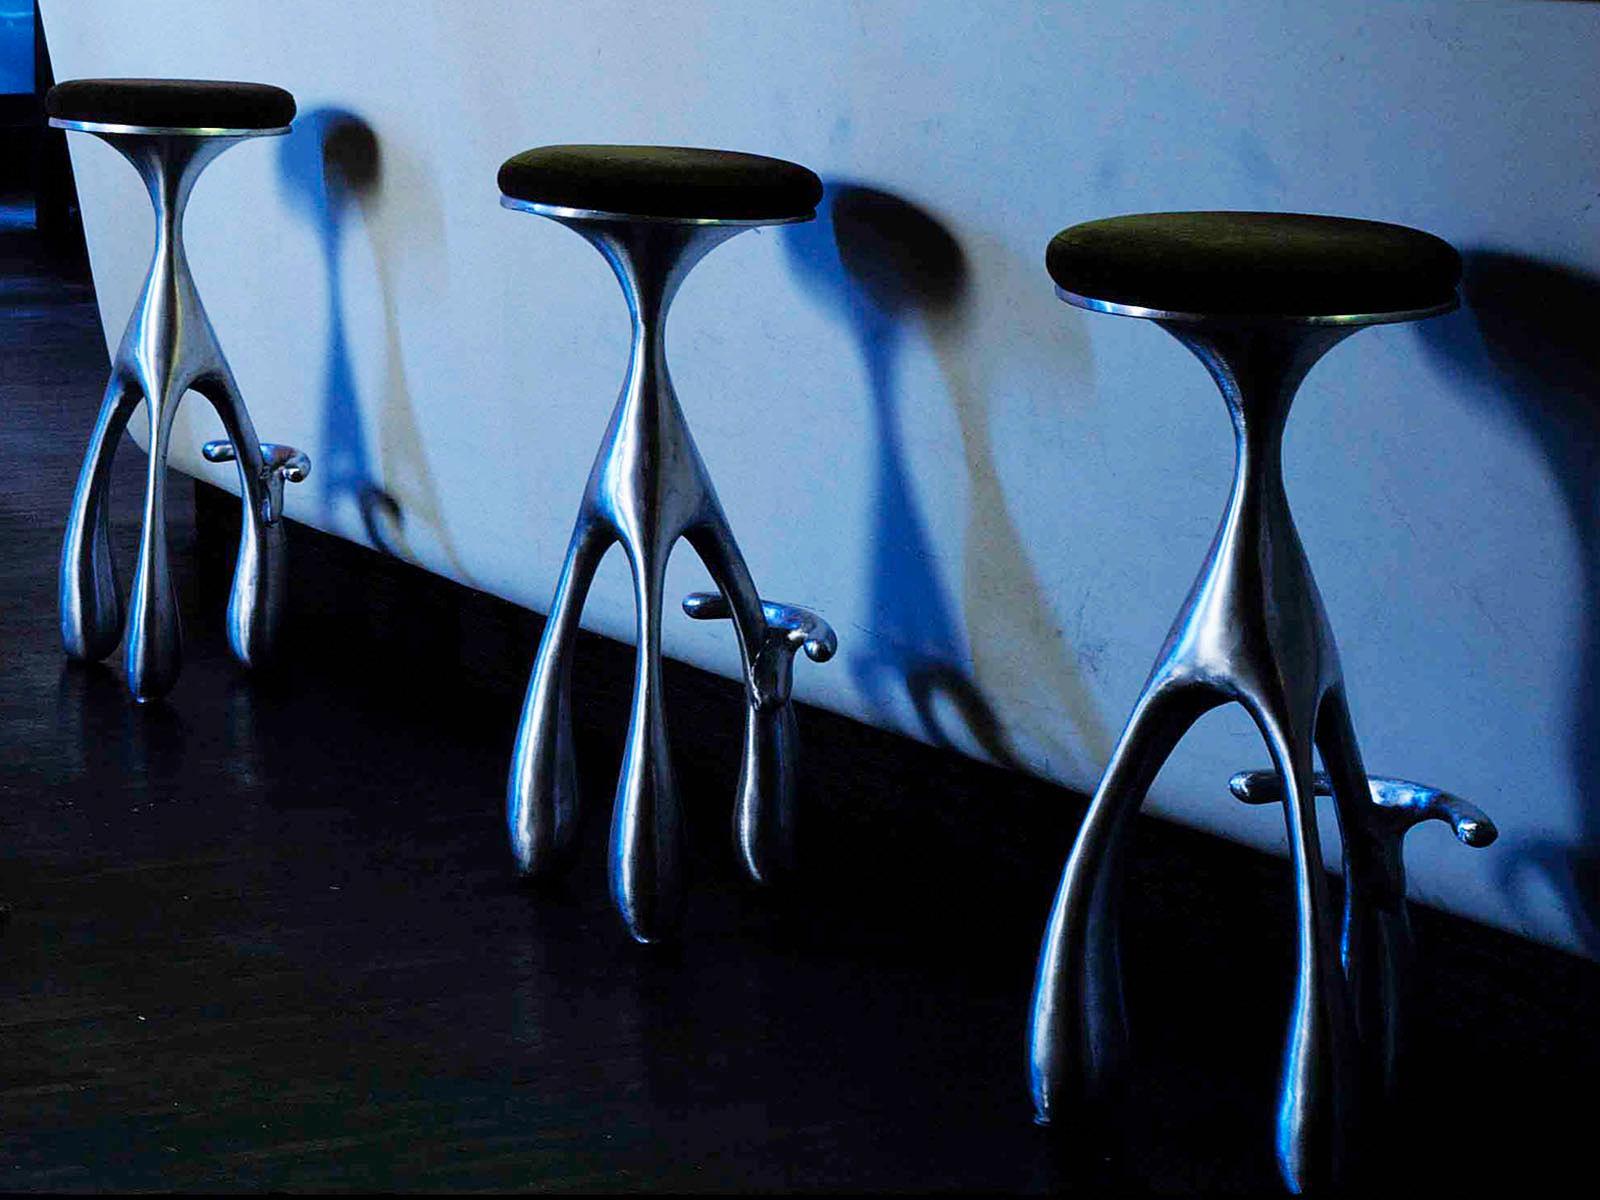 3-Leg Goose Stools, Cast Patinated Aluminum, Mohair, Jordan Mozer, 2004/2018 In New Condition For Sale In Chicago, IL